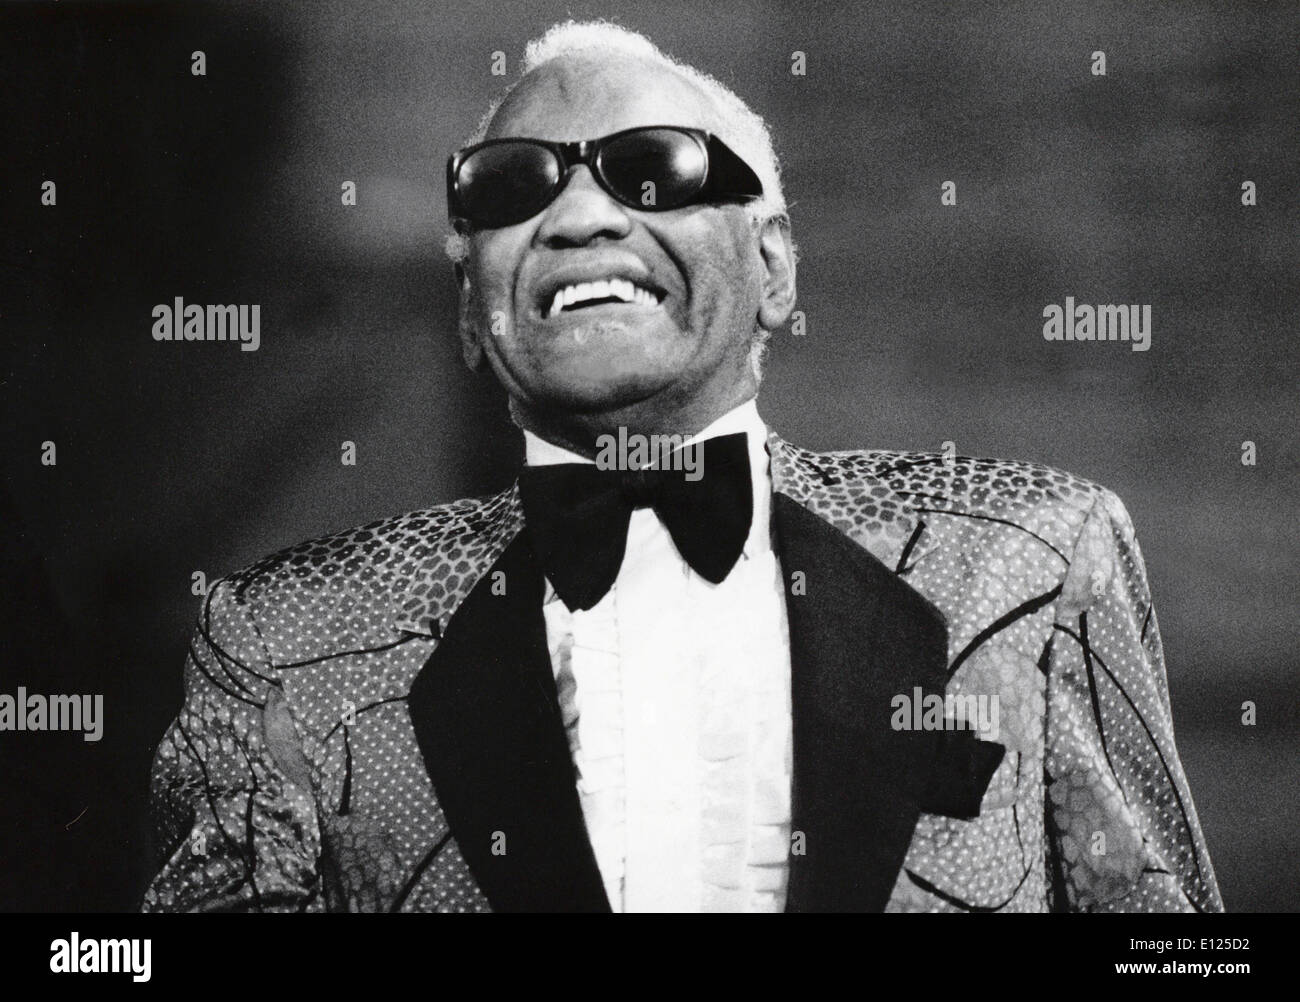 Singer Ray Charles performs in concert Stock Photo